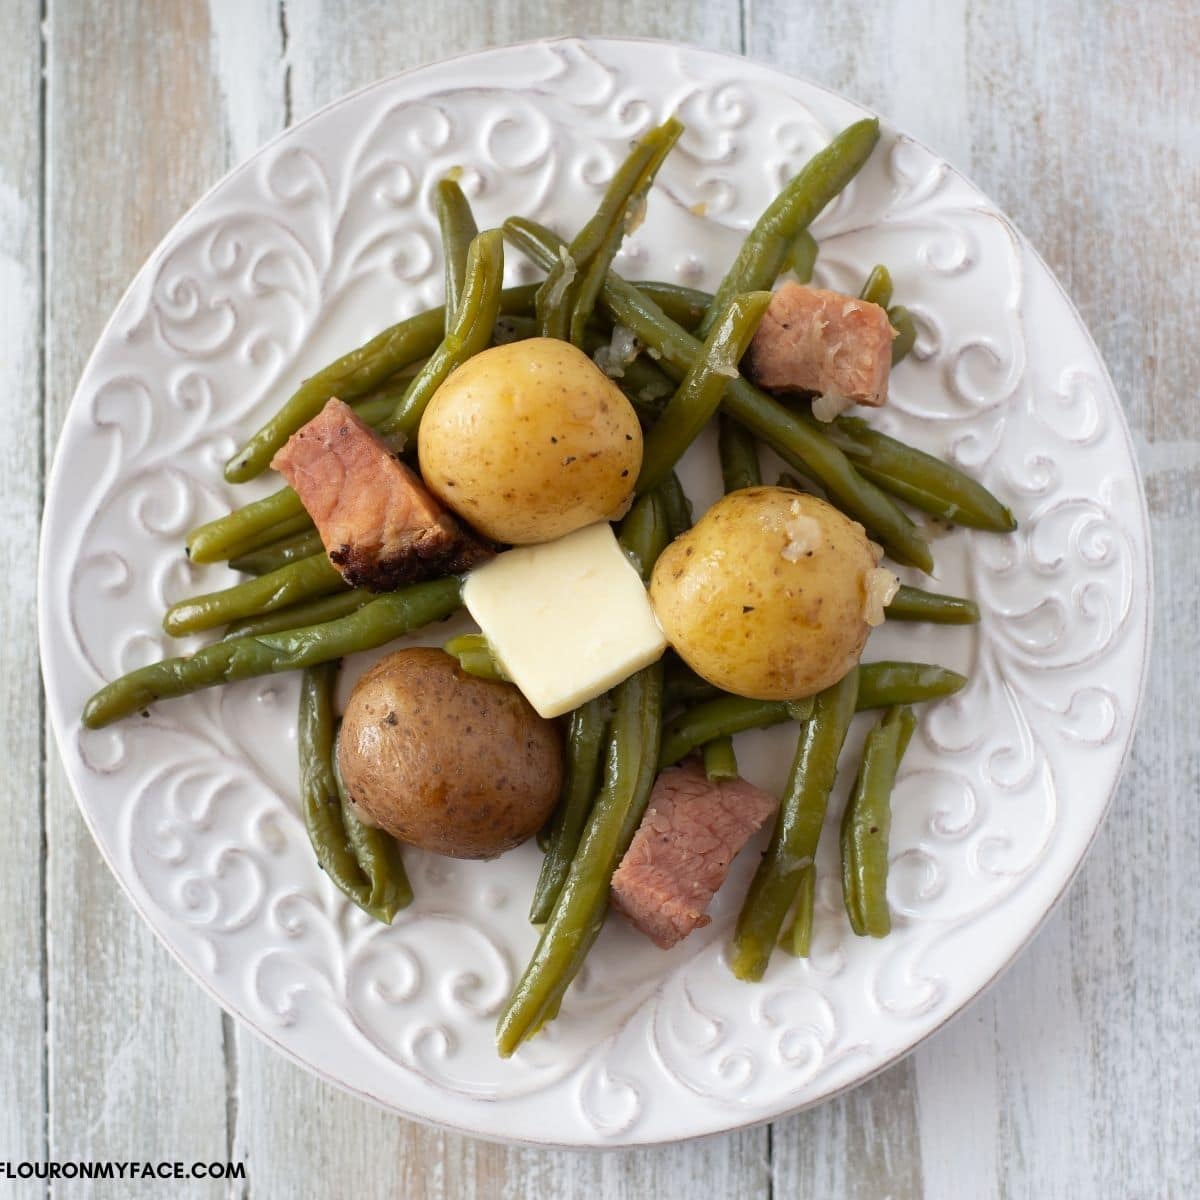 Green beans and baby potatoes on a plate.